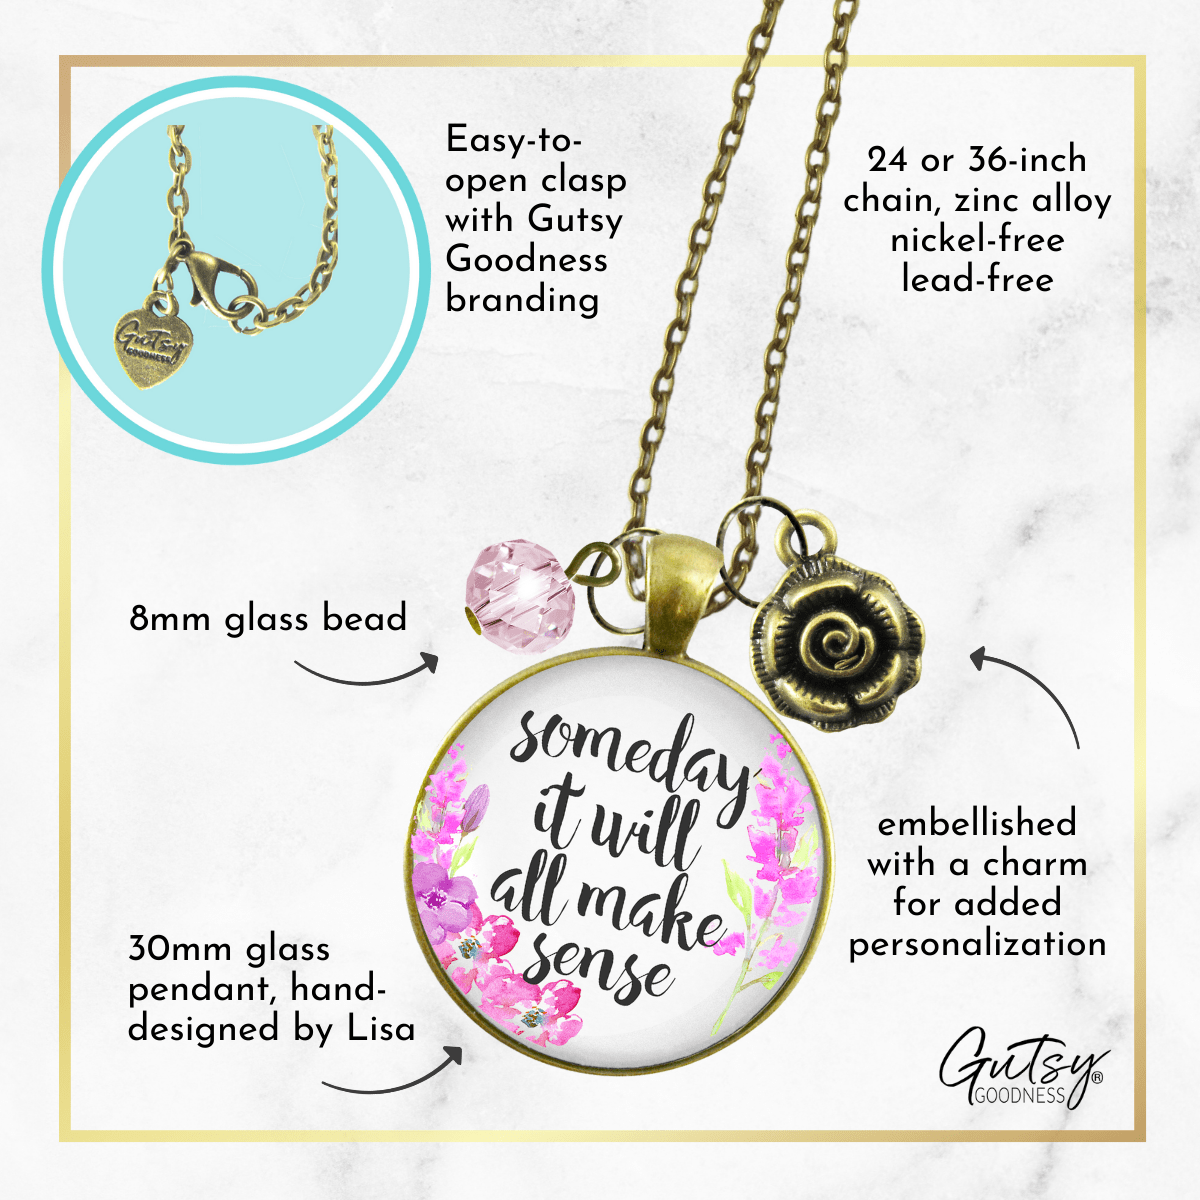 Gutsy Goodness Some Day It Will All Make Sense Necklace Encouraging Jewelry Heart - Gutsy Goodness Handmade Jewelry;Some Day It Will All Make Sense Necklace Encouraging Jewelry Heart - Gutsy Goodness Handmade Jewelry Gifts